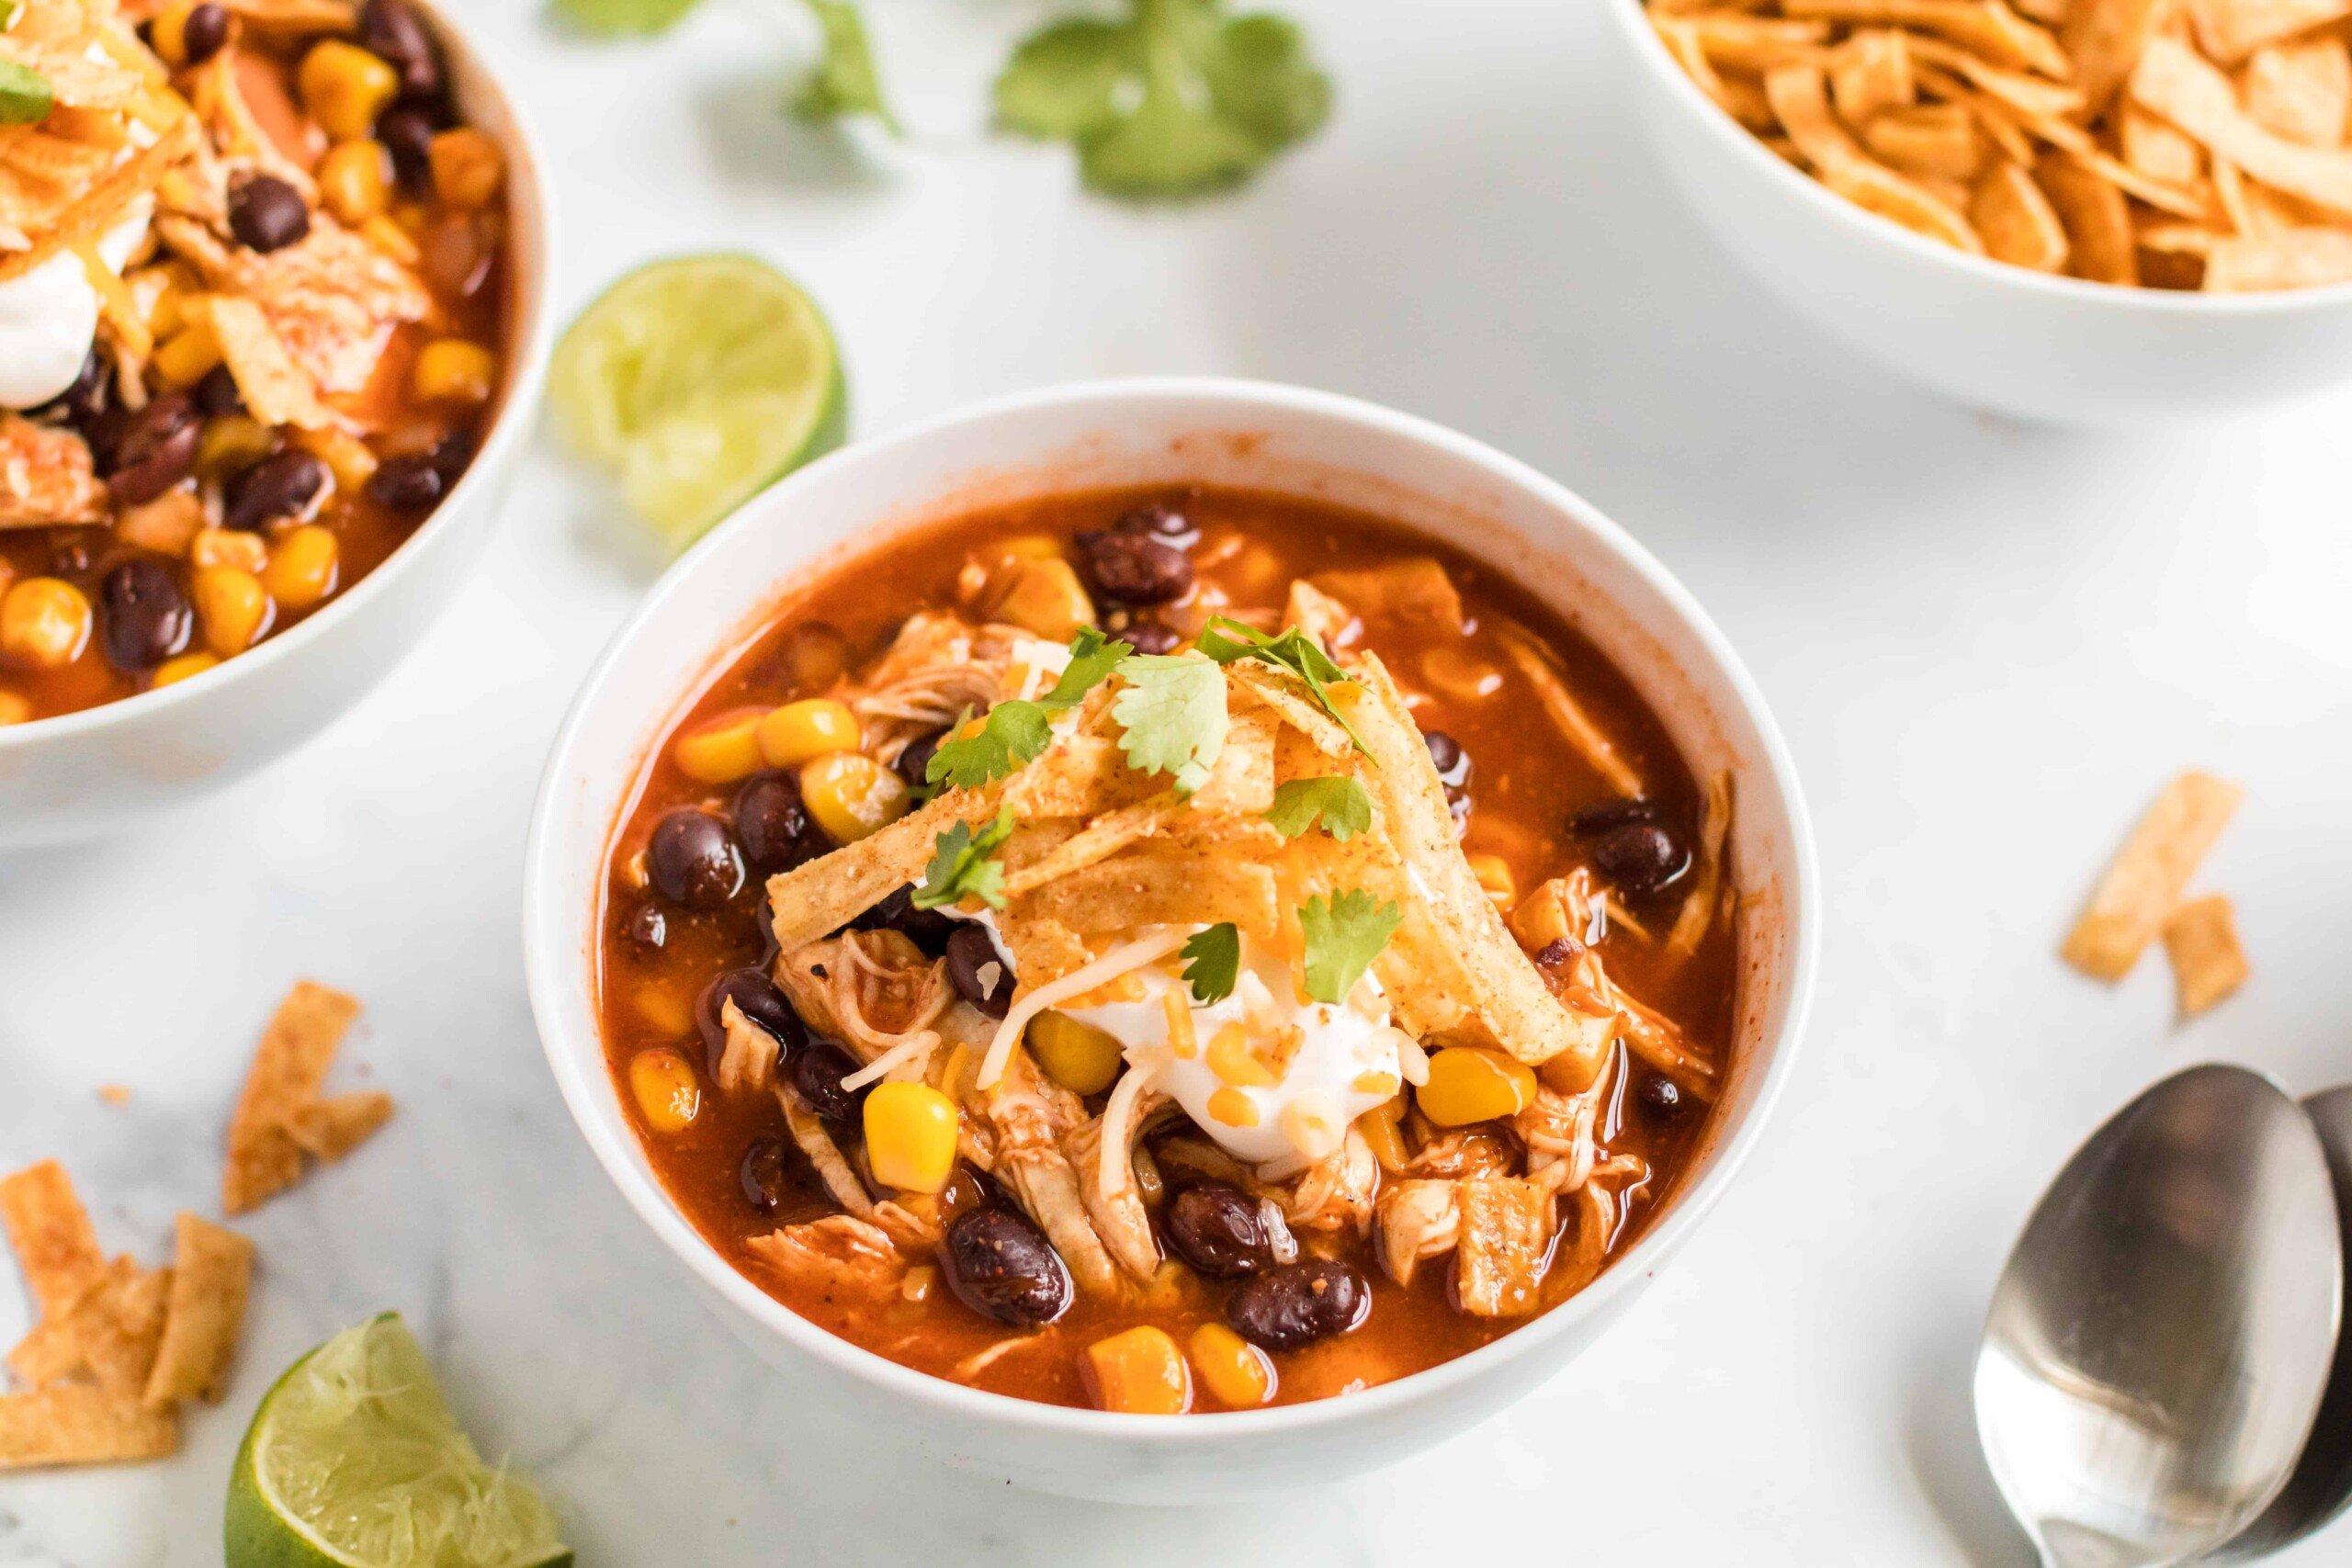 Chicken enchilada soup in a white bowl with tortilla stips and sour cream garnish.